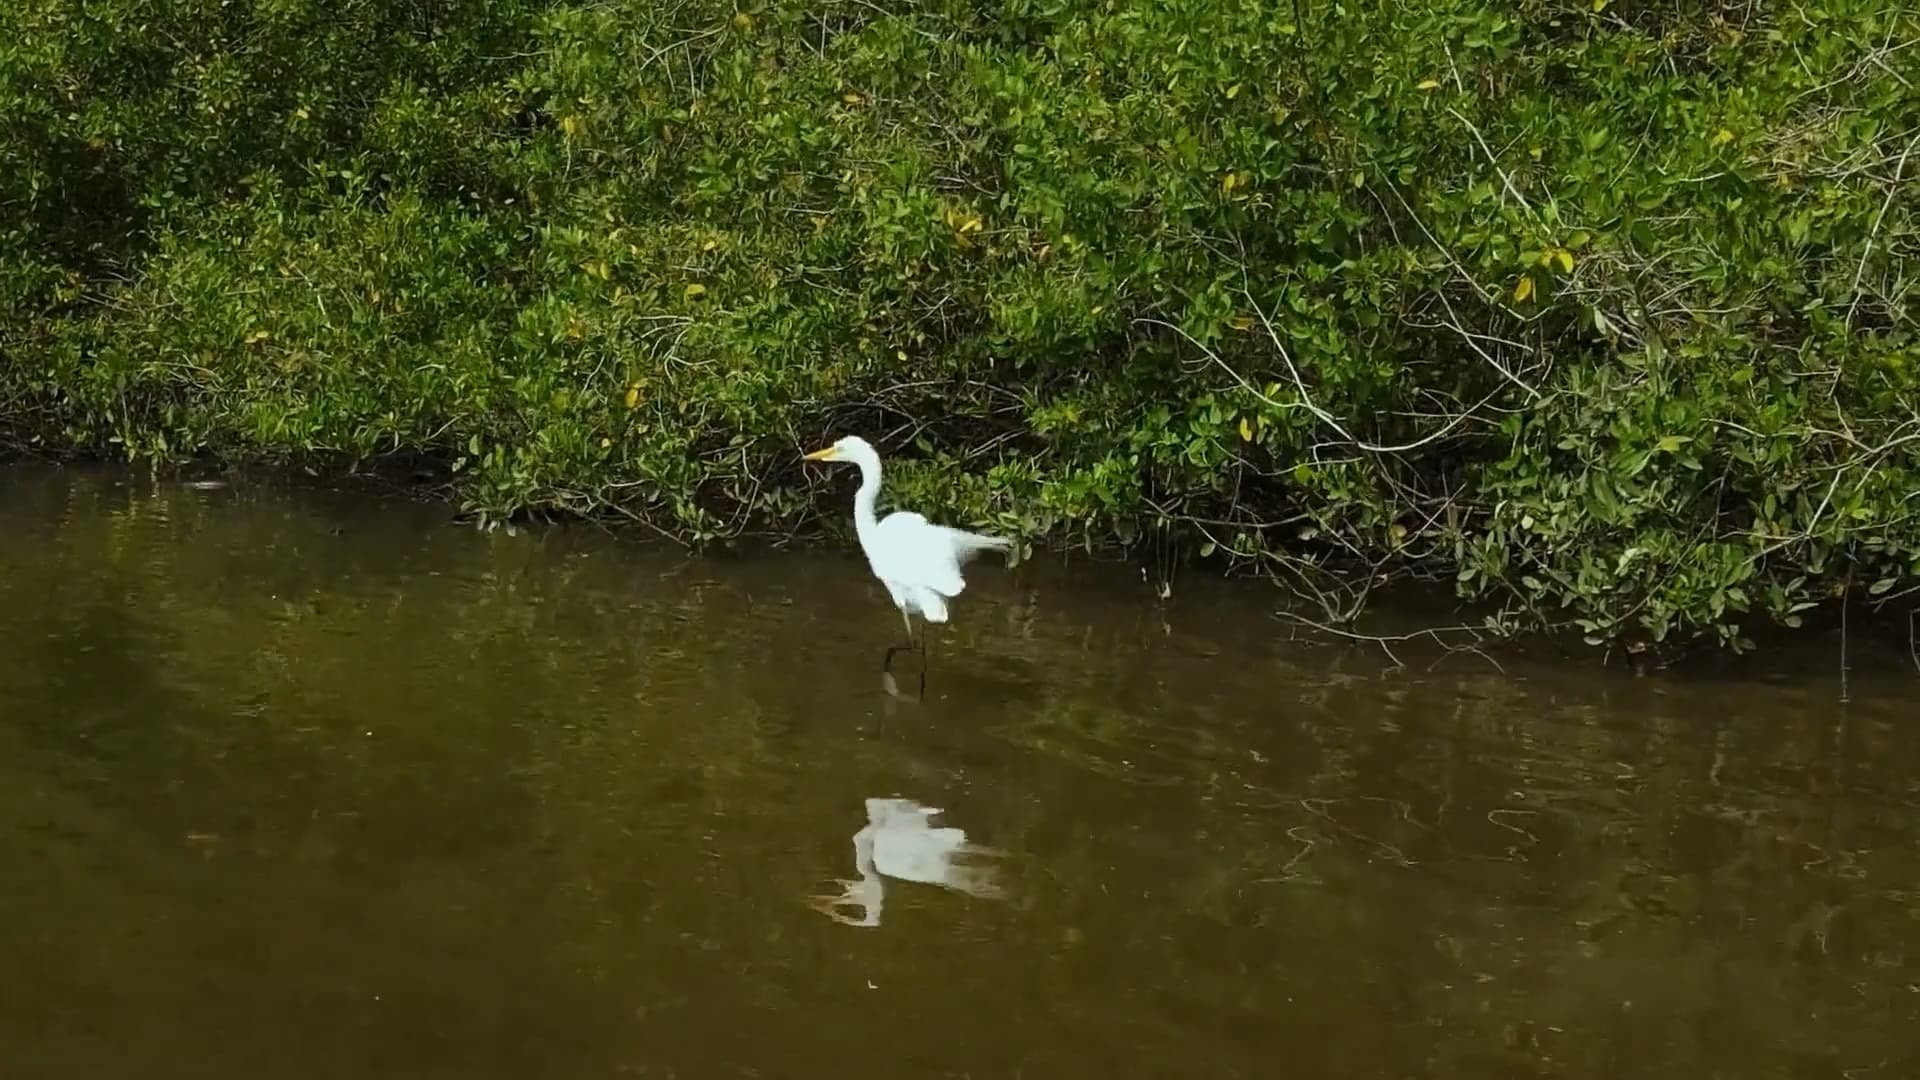 An egret standing in water